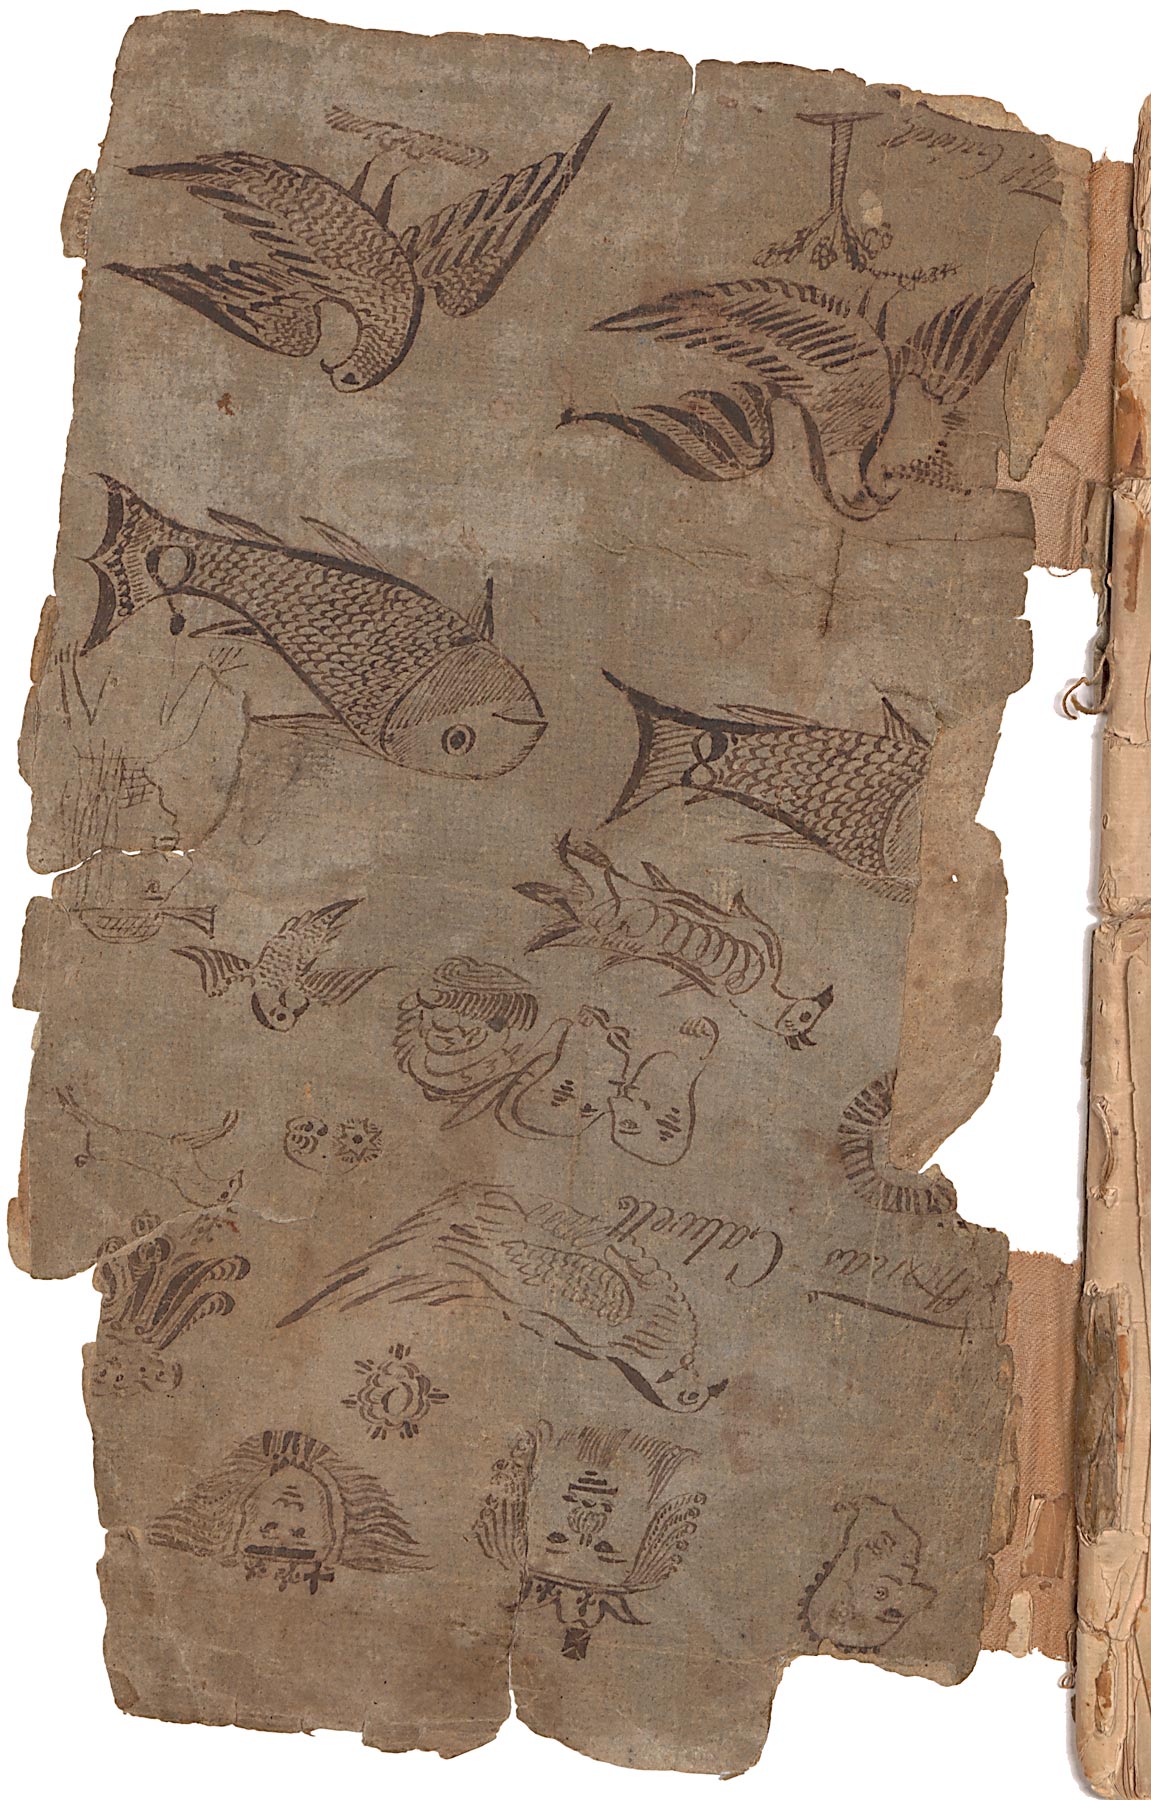 Thomas Calwell, hand-drawn illustrations on inside cover of 1750–1755 copybook